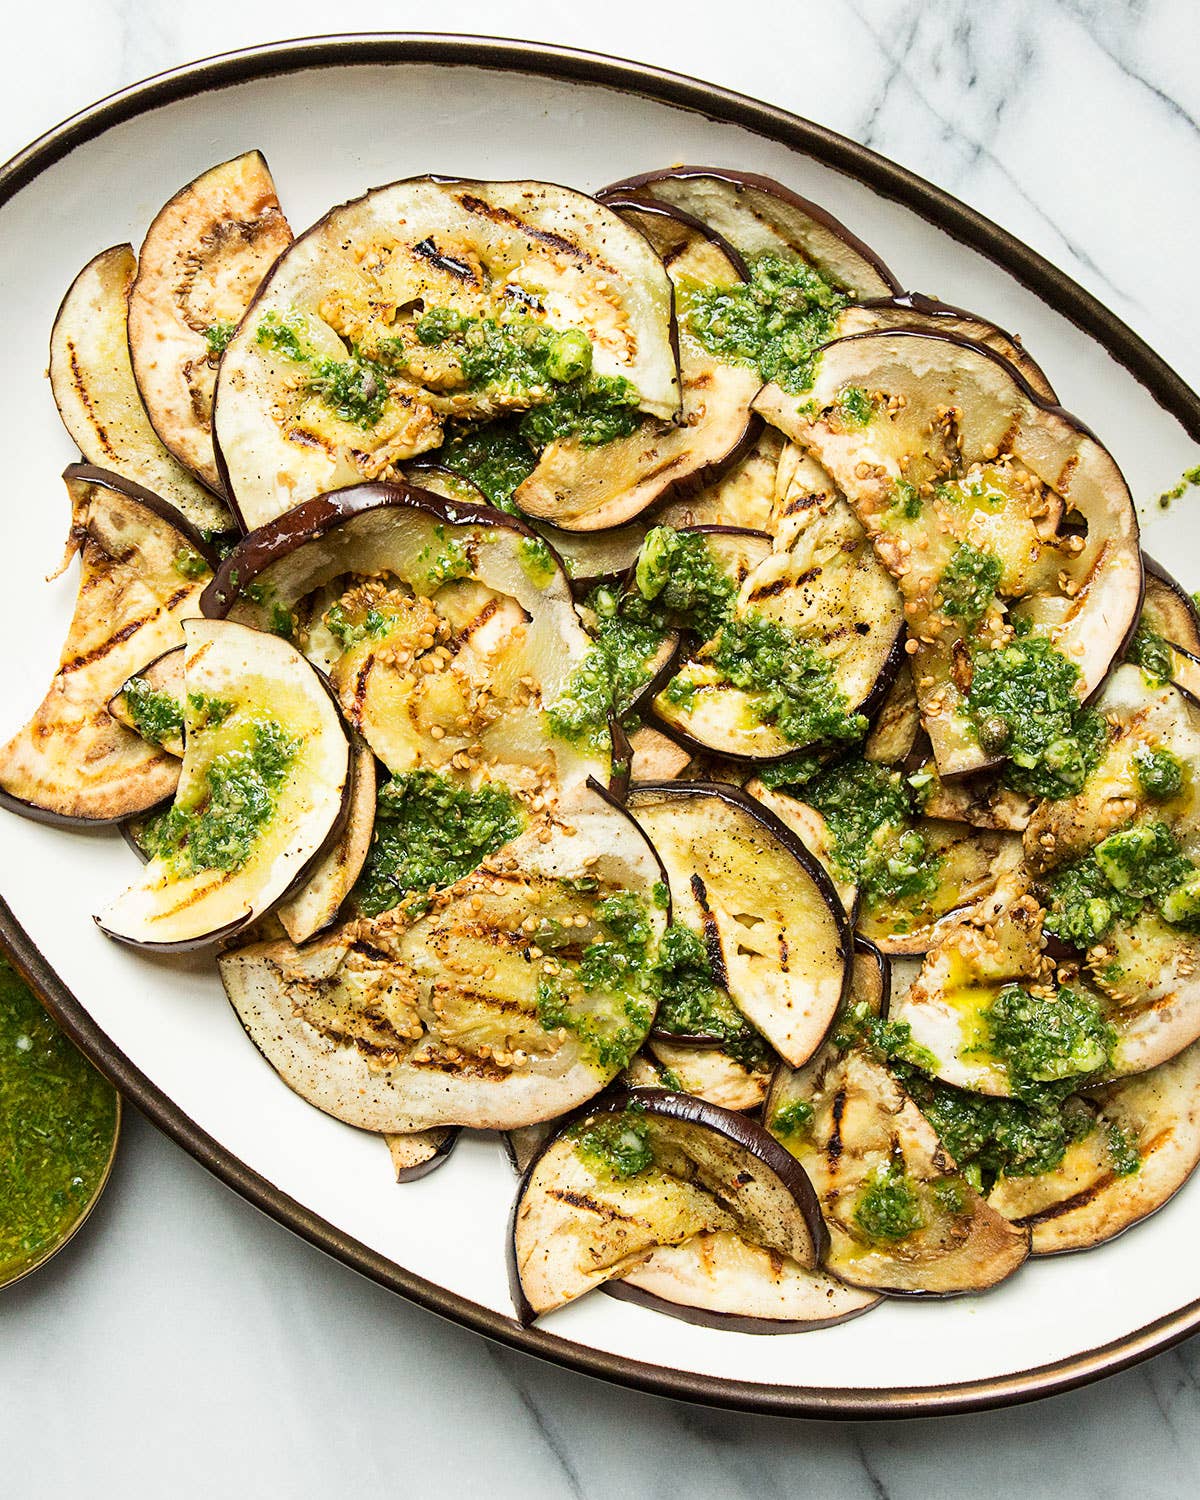 No Grill? No Problem—This Eggplant Dish is Great Indoors